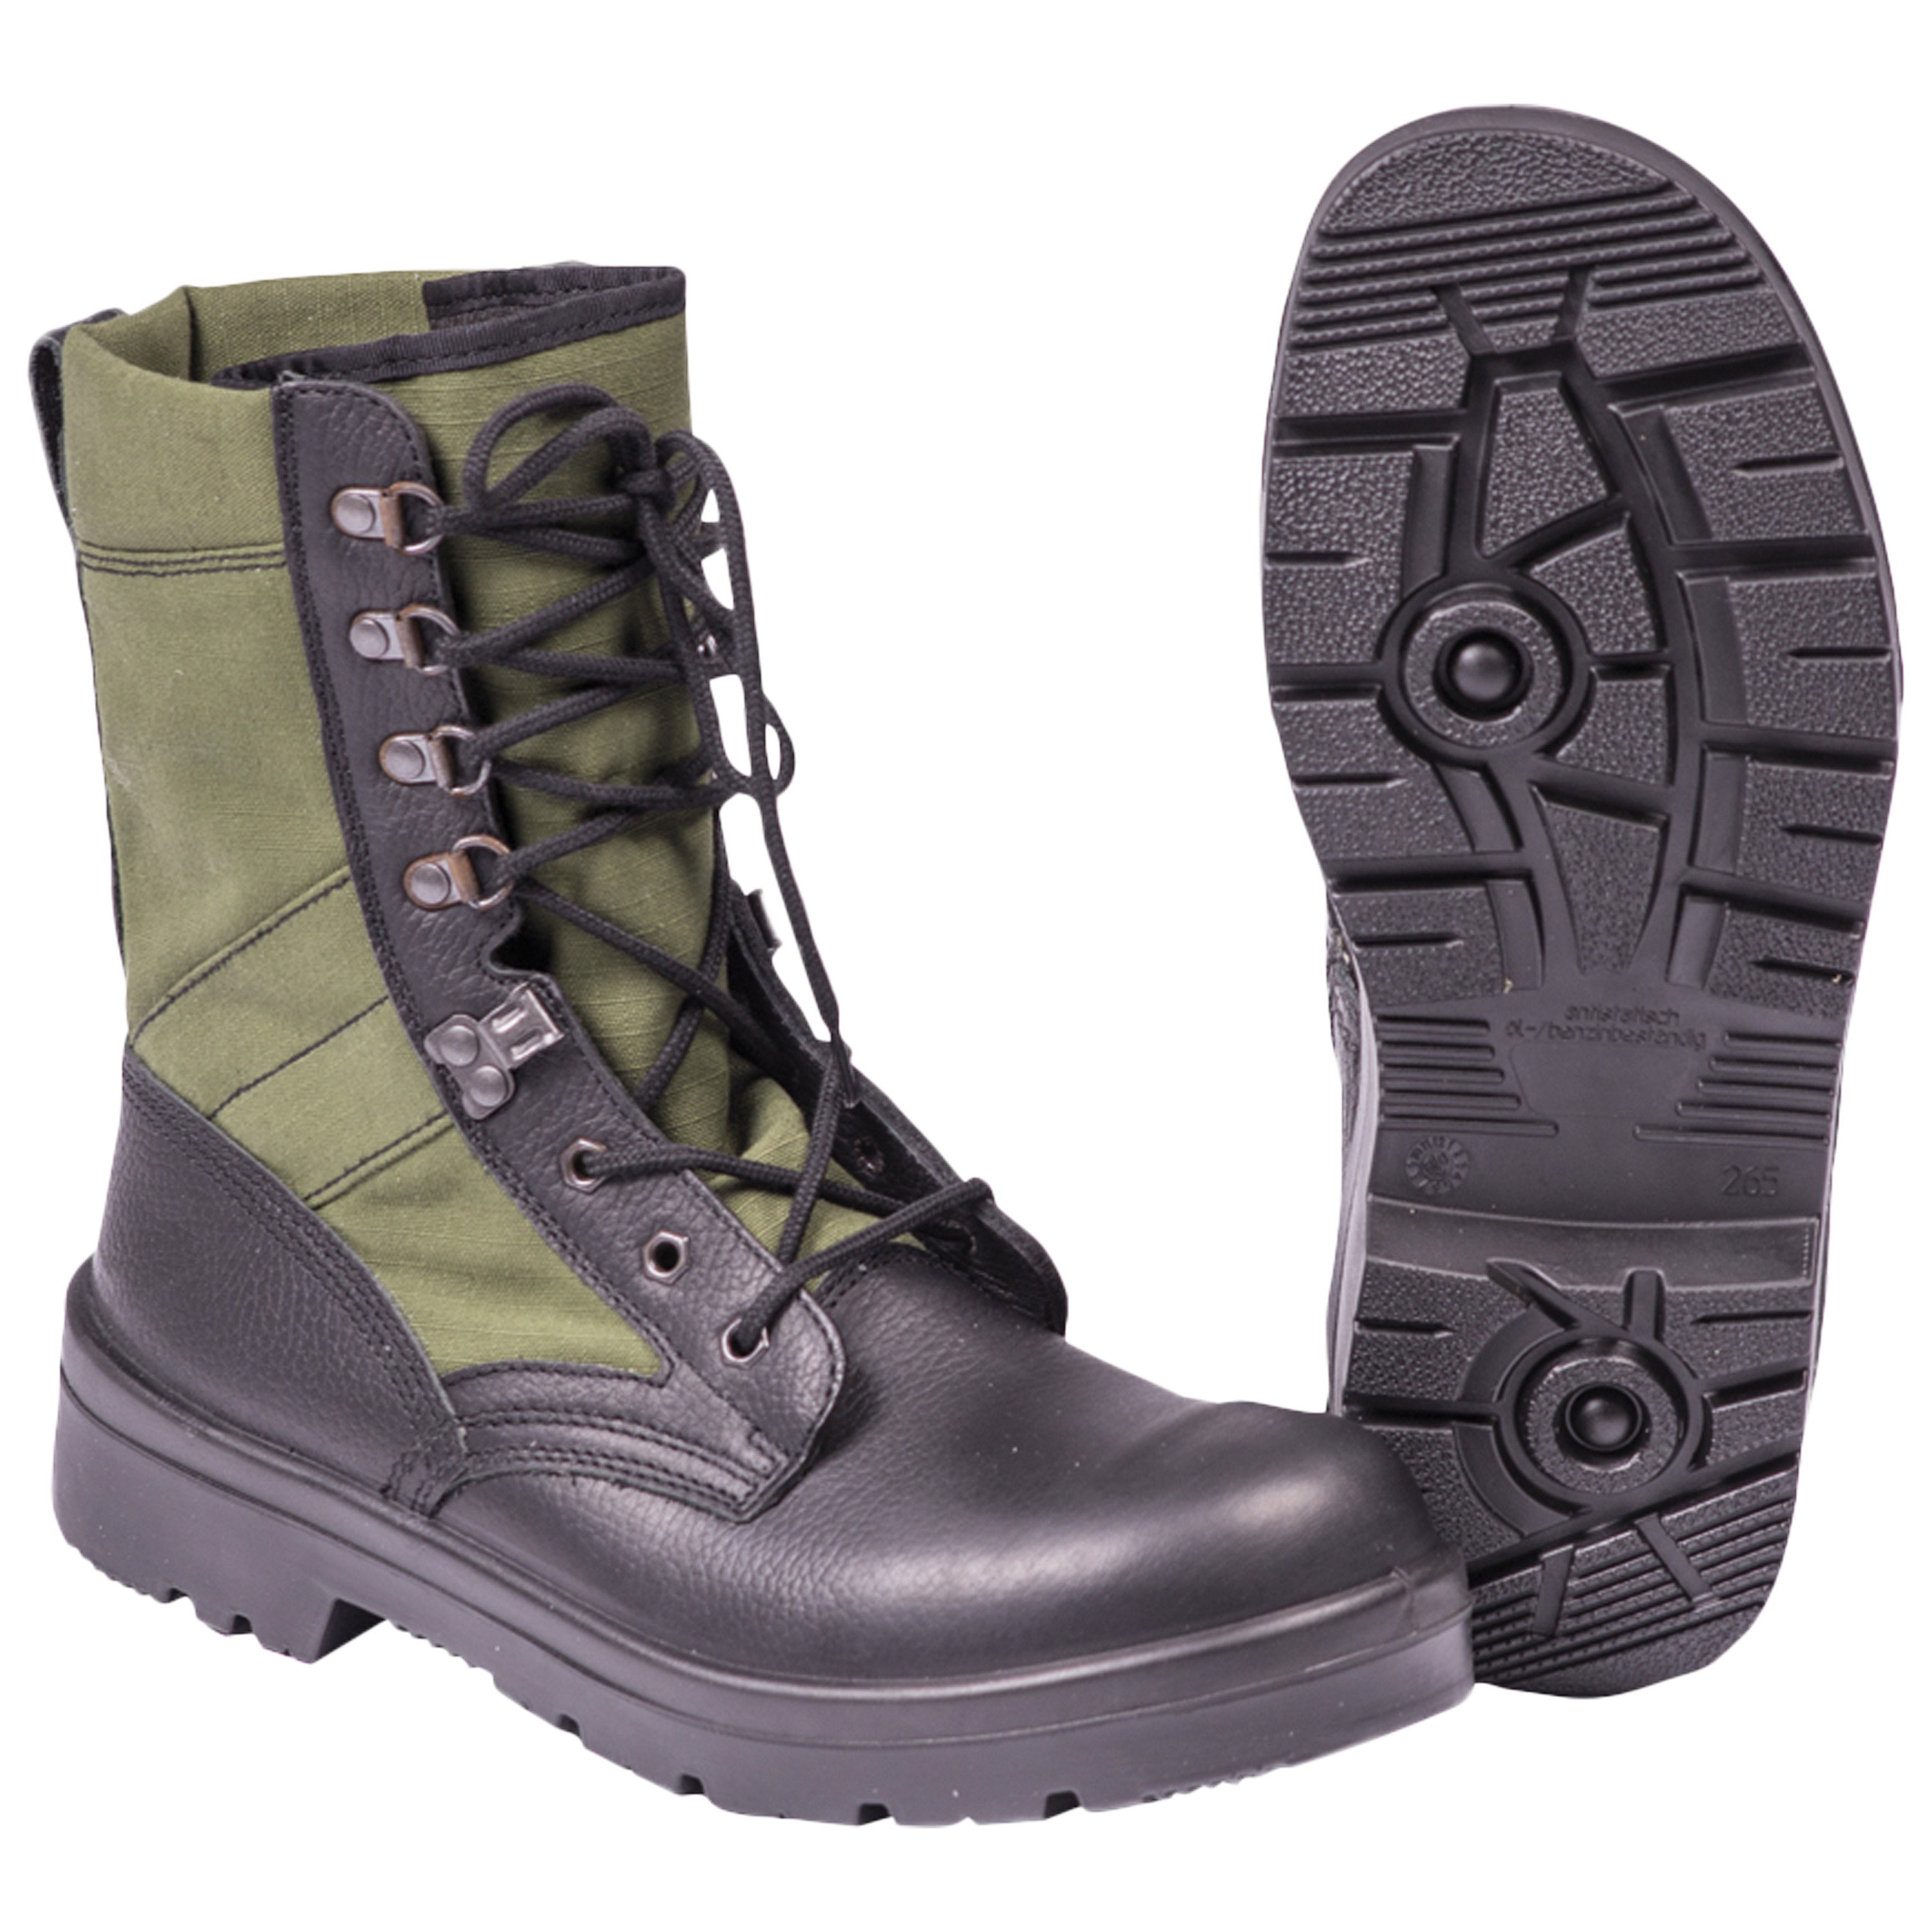 olive boots